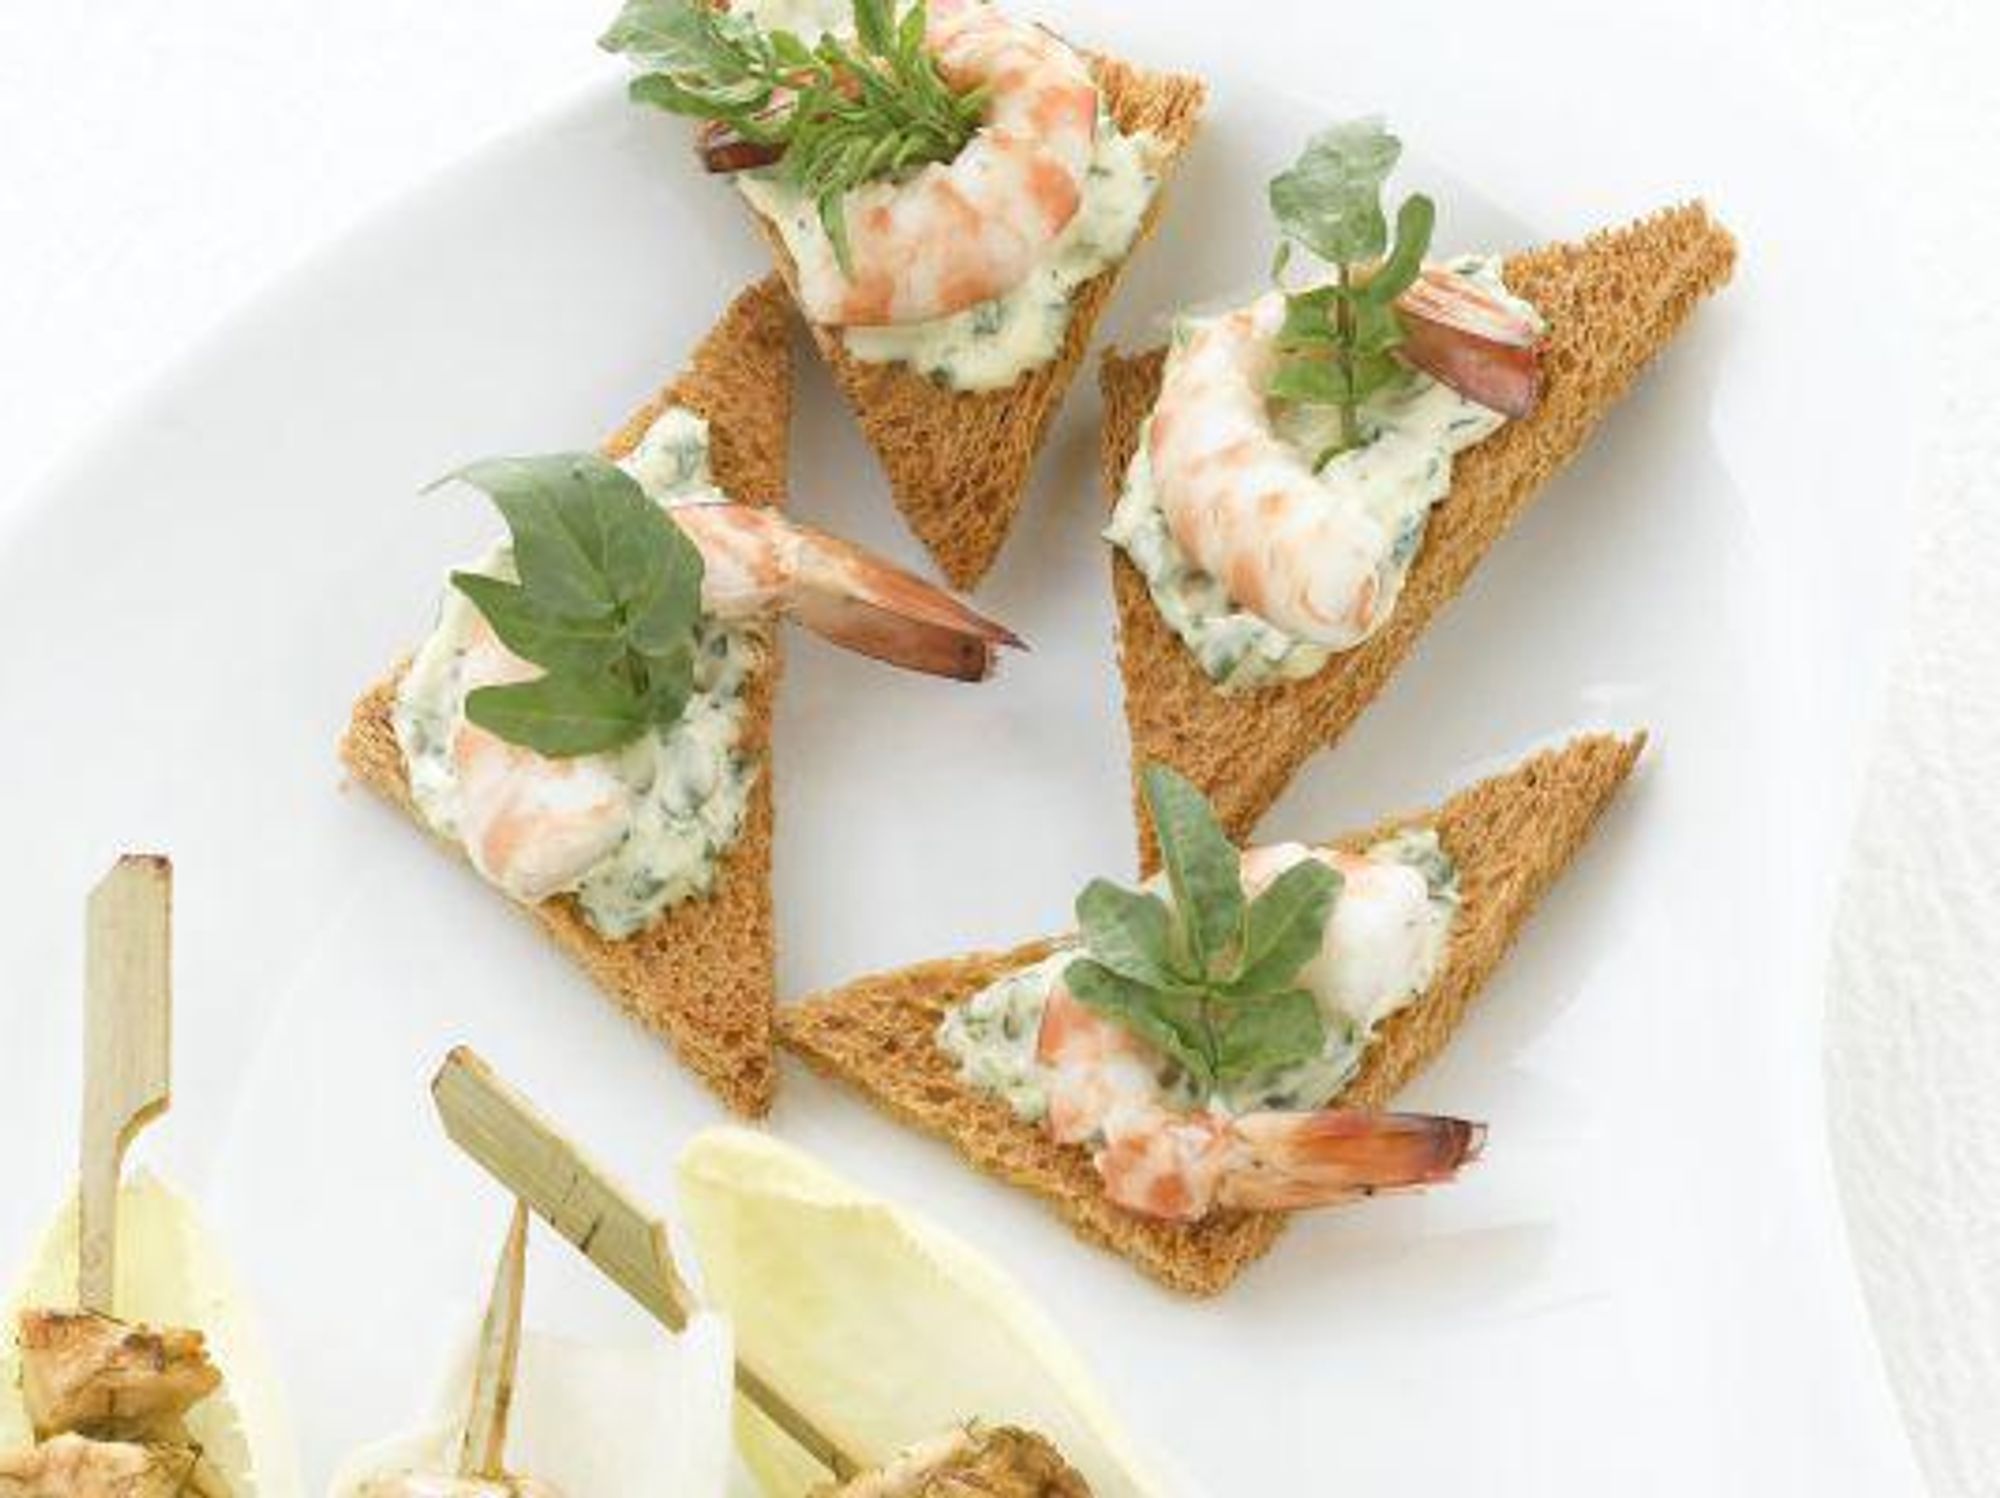 Toasted bread with prawns